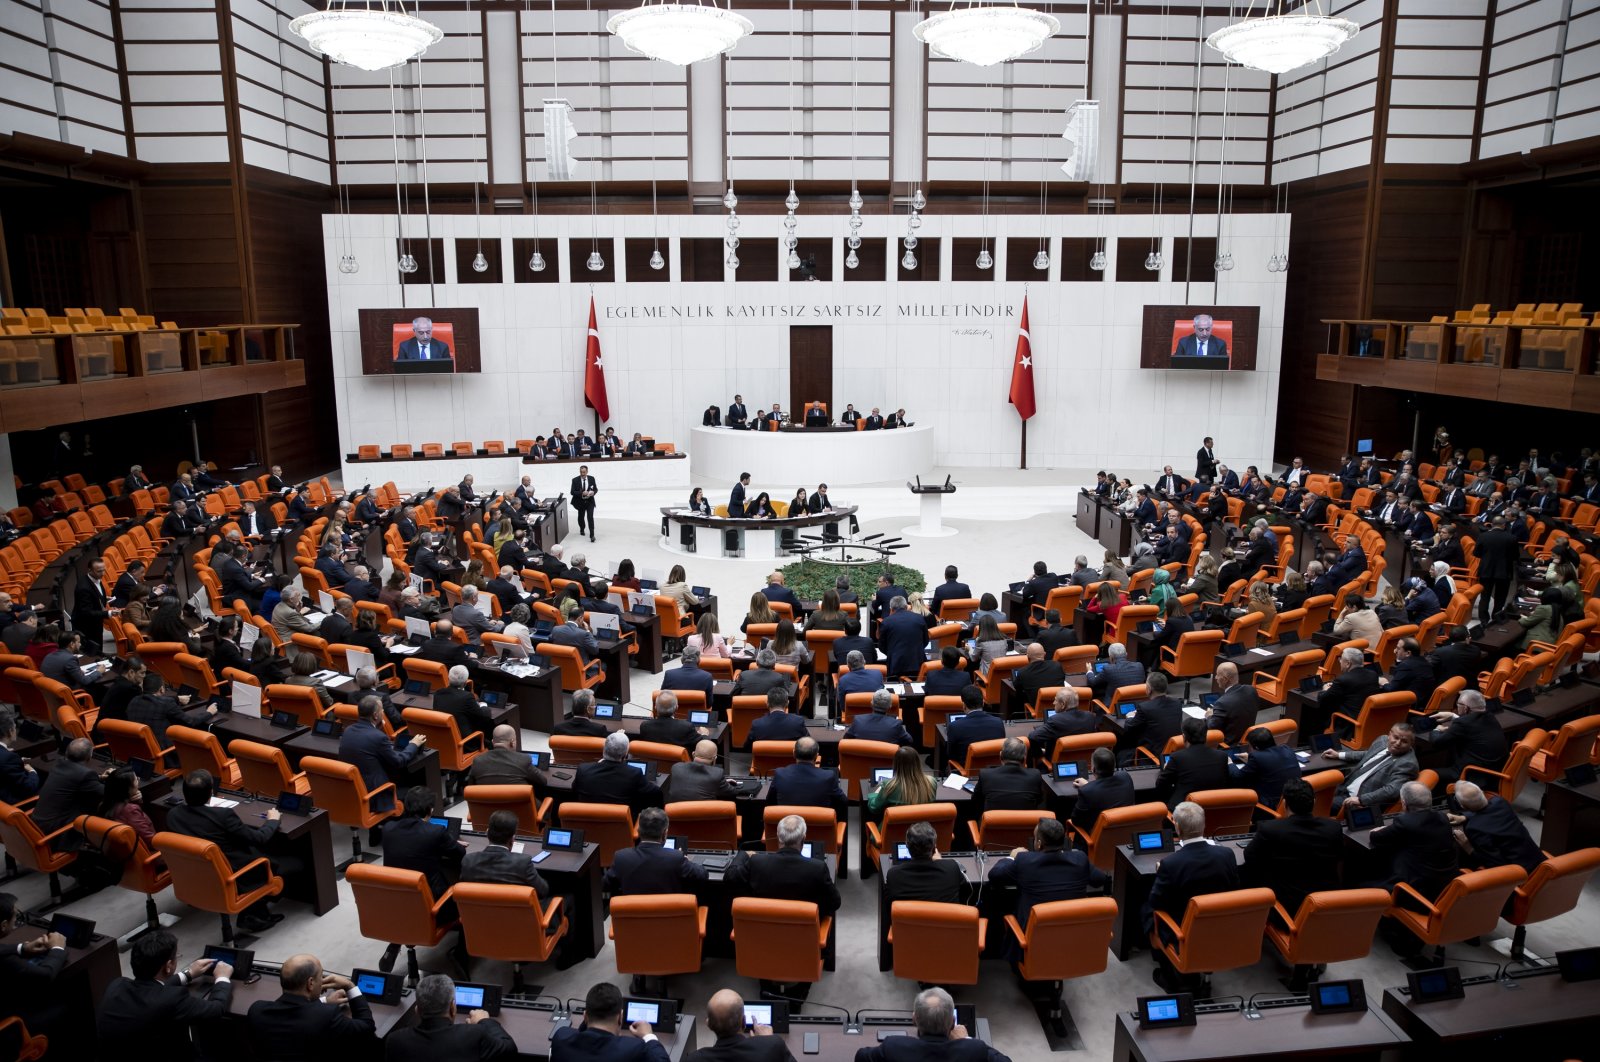 Lawmakers during a session to approve the omnibus bill at the Turkish Parliament, Nov. 16, 2022. (AA Photo)